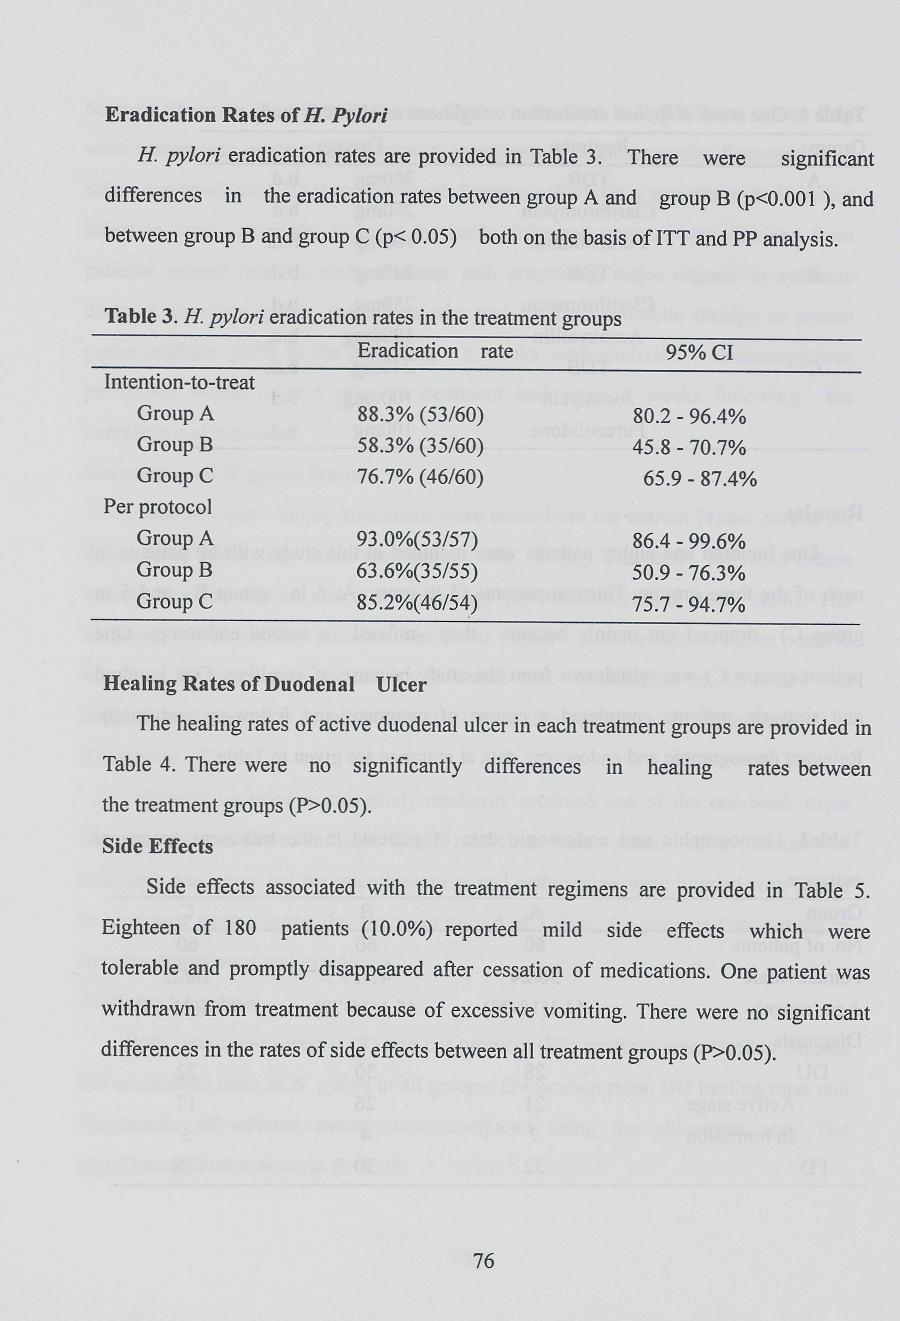 Eradication Rates of H. Pylori H. pylori eradication rates are provided in Table 3. There were significant differences in the eradication rates between group A and group B (po.